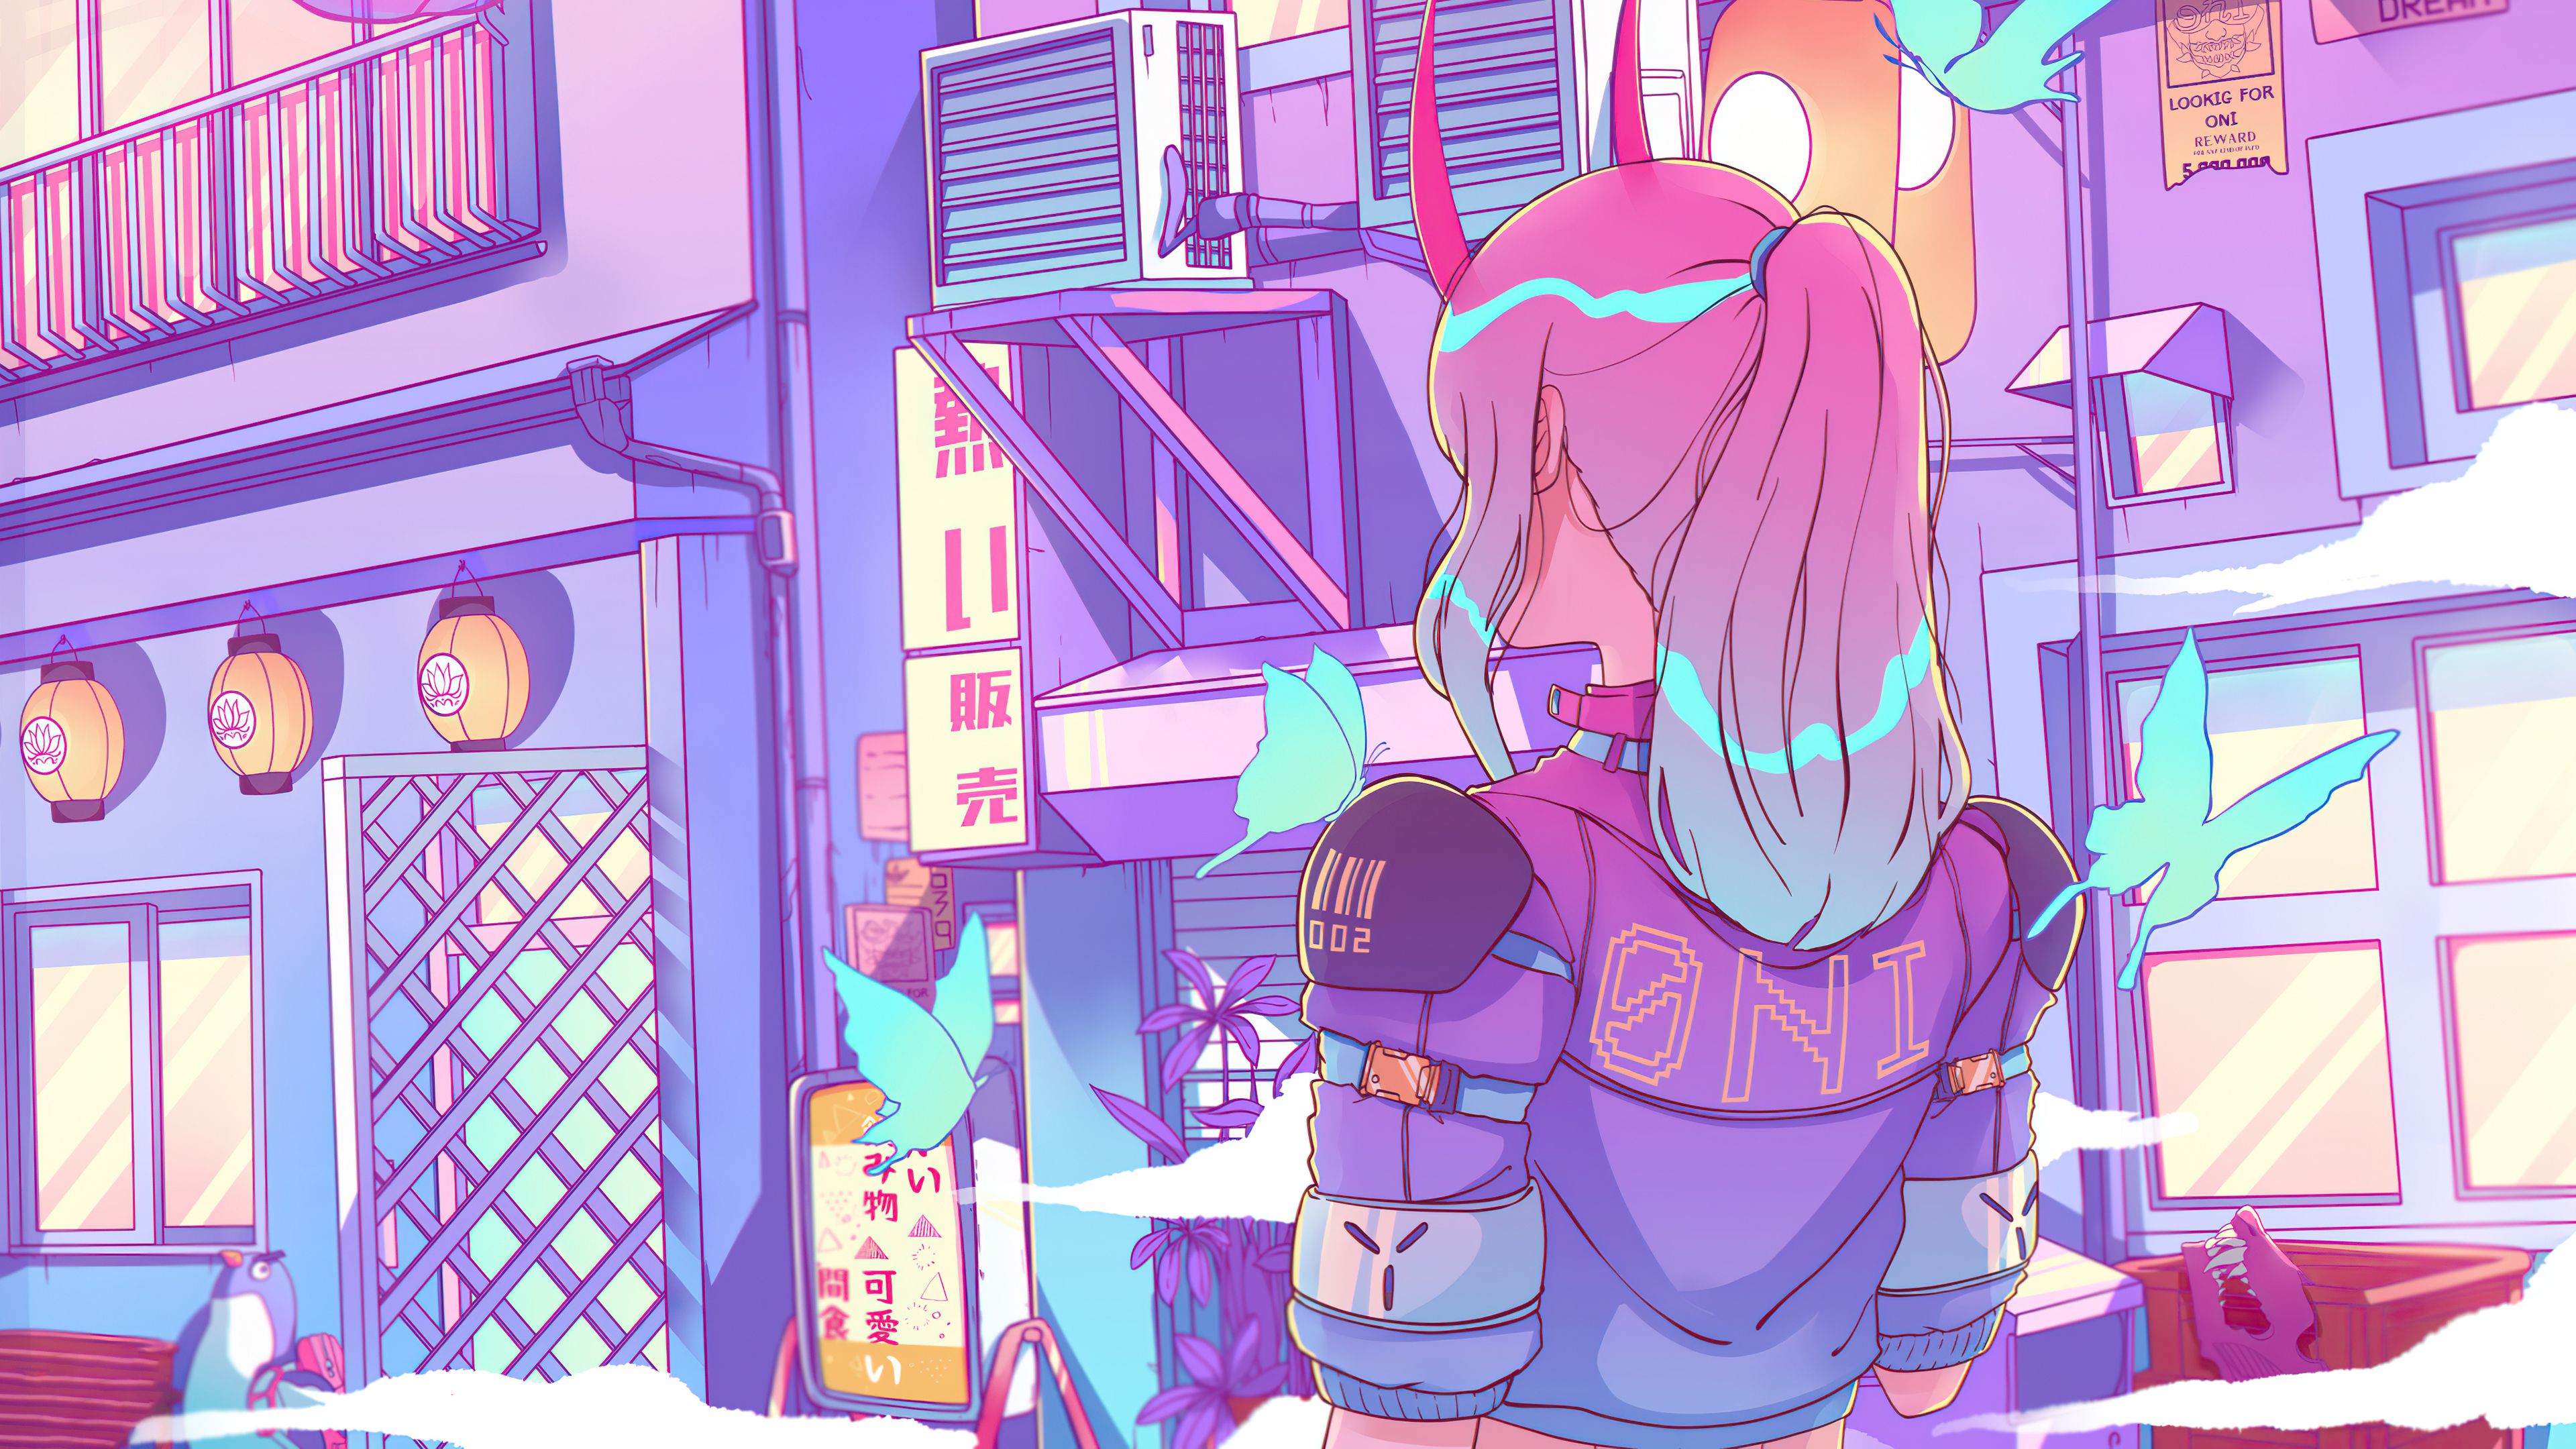 <ref> A girl</ref><box>(480,10),(928,996)</box> with pink hair and<ref> a hoodie</ref><box>(481,496),(818,993)</box> is standing in a futuristic city - Synthwave